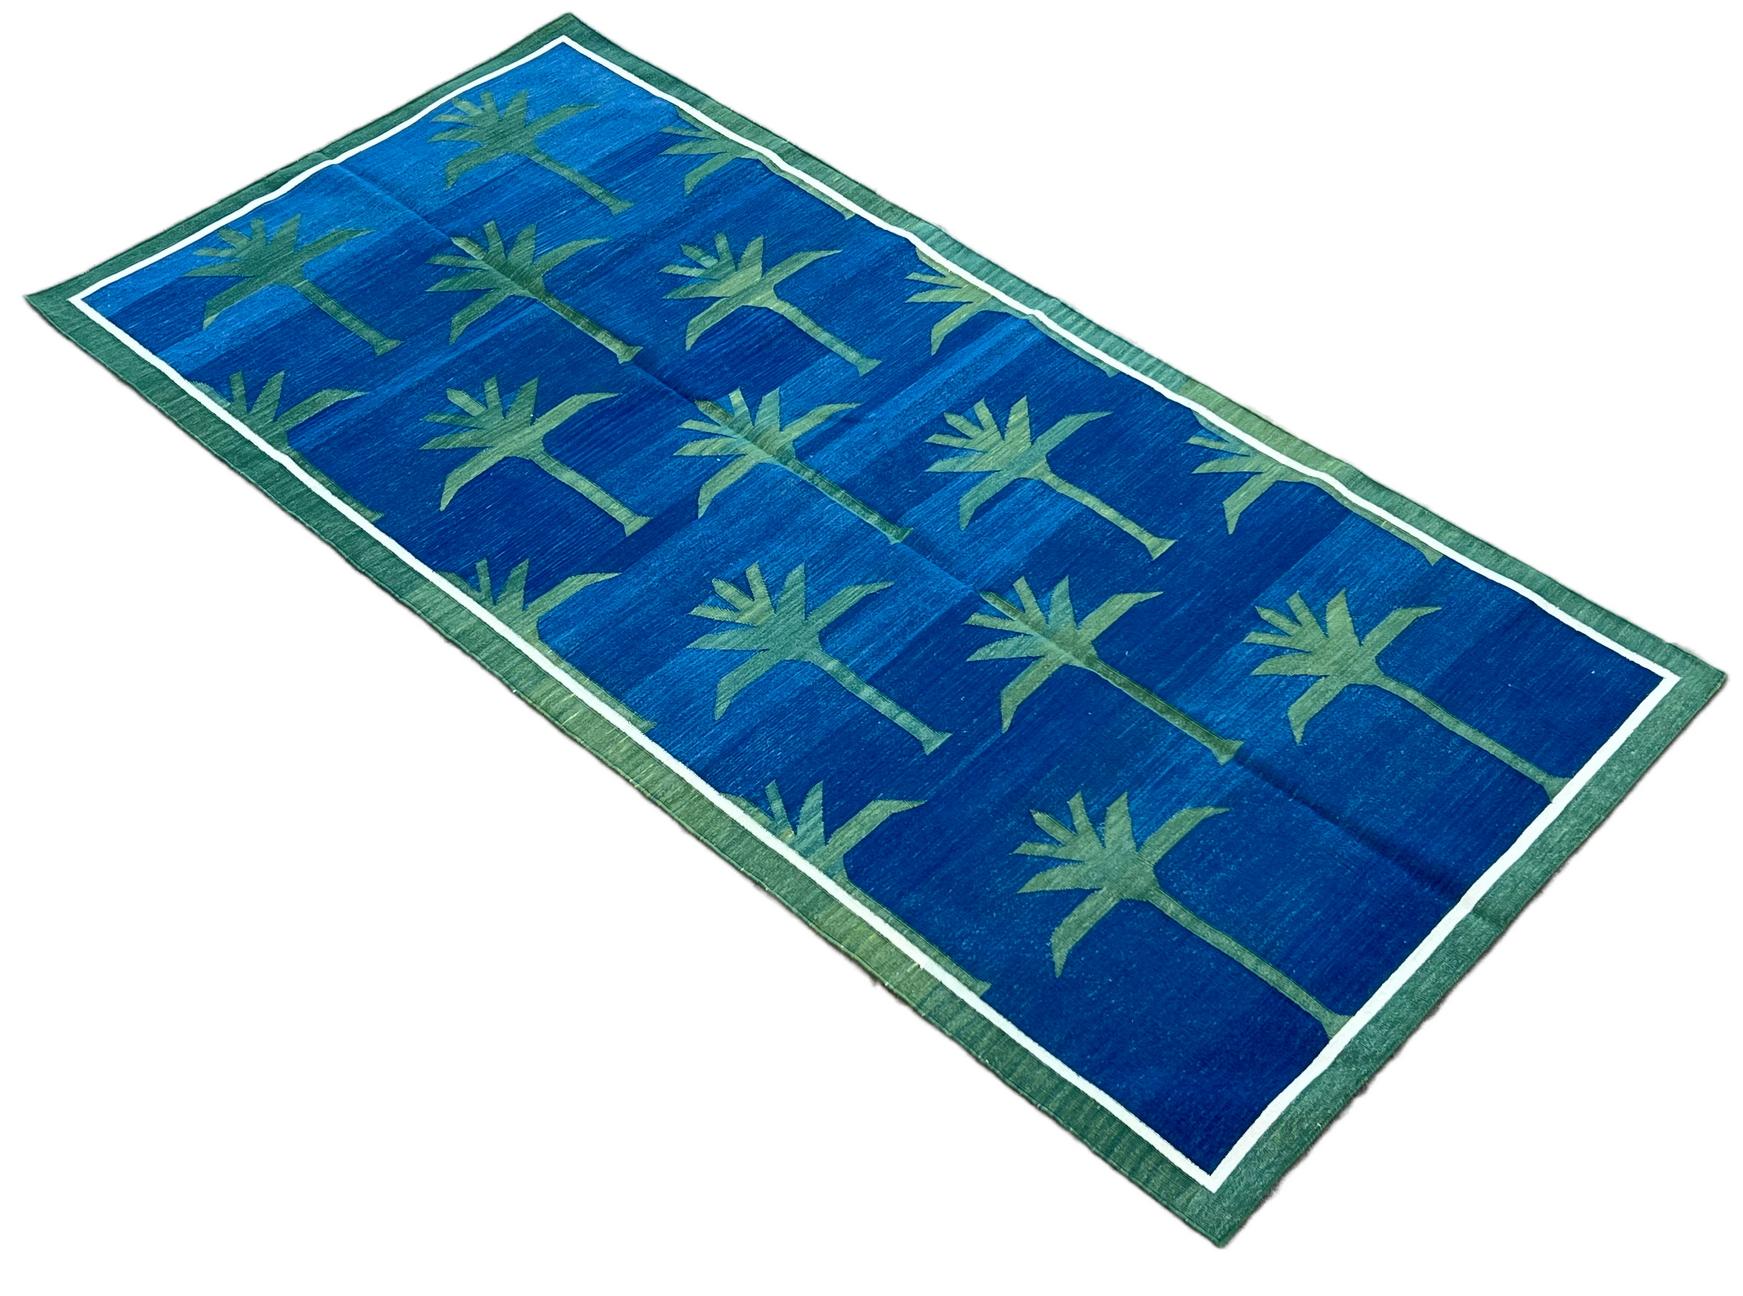 Cotton Natural Vegetable Dyed Indigo Blue And Green Palm Tree Patterned Indian Rug-4'x8'
These special flat-weave dhurries are hand-woven with 15 ply 100% cotton yarn. Due to the special manufacturing techniques used to create our rugs, the size and